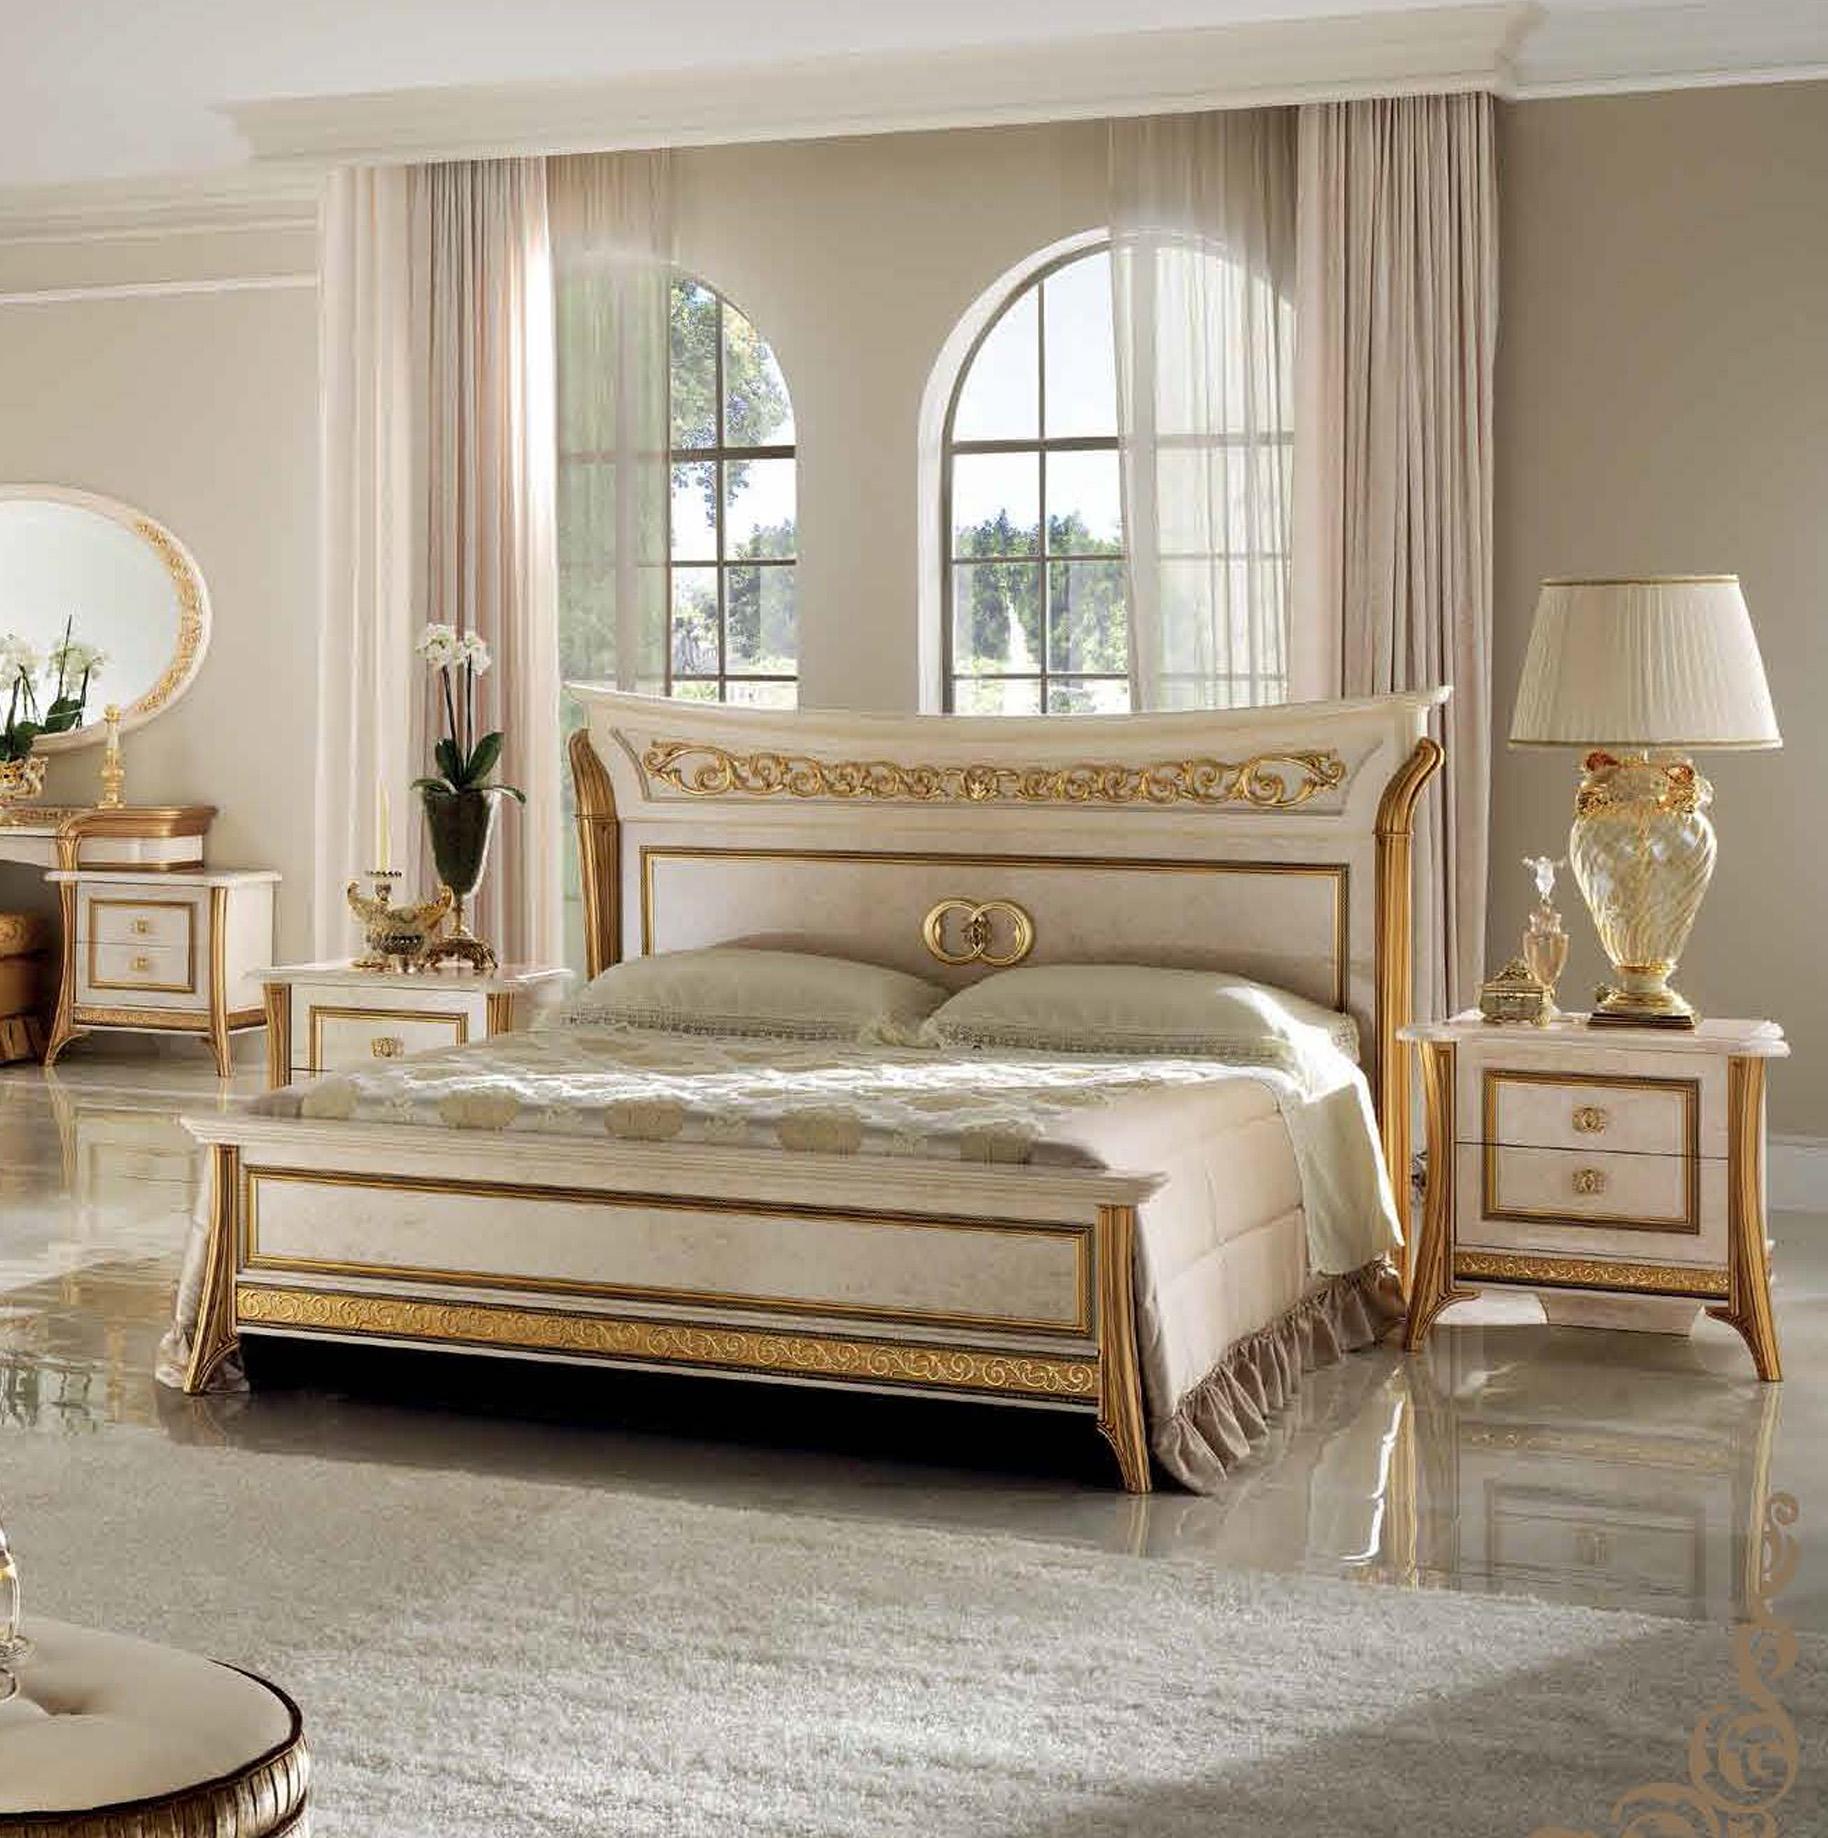 

    
Luxury Ivory & Carved Gold King Bedroom Set 3 Melodia ESF Made in Italy Classic
